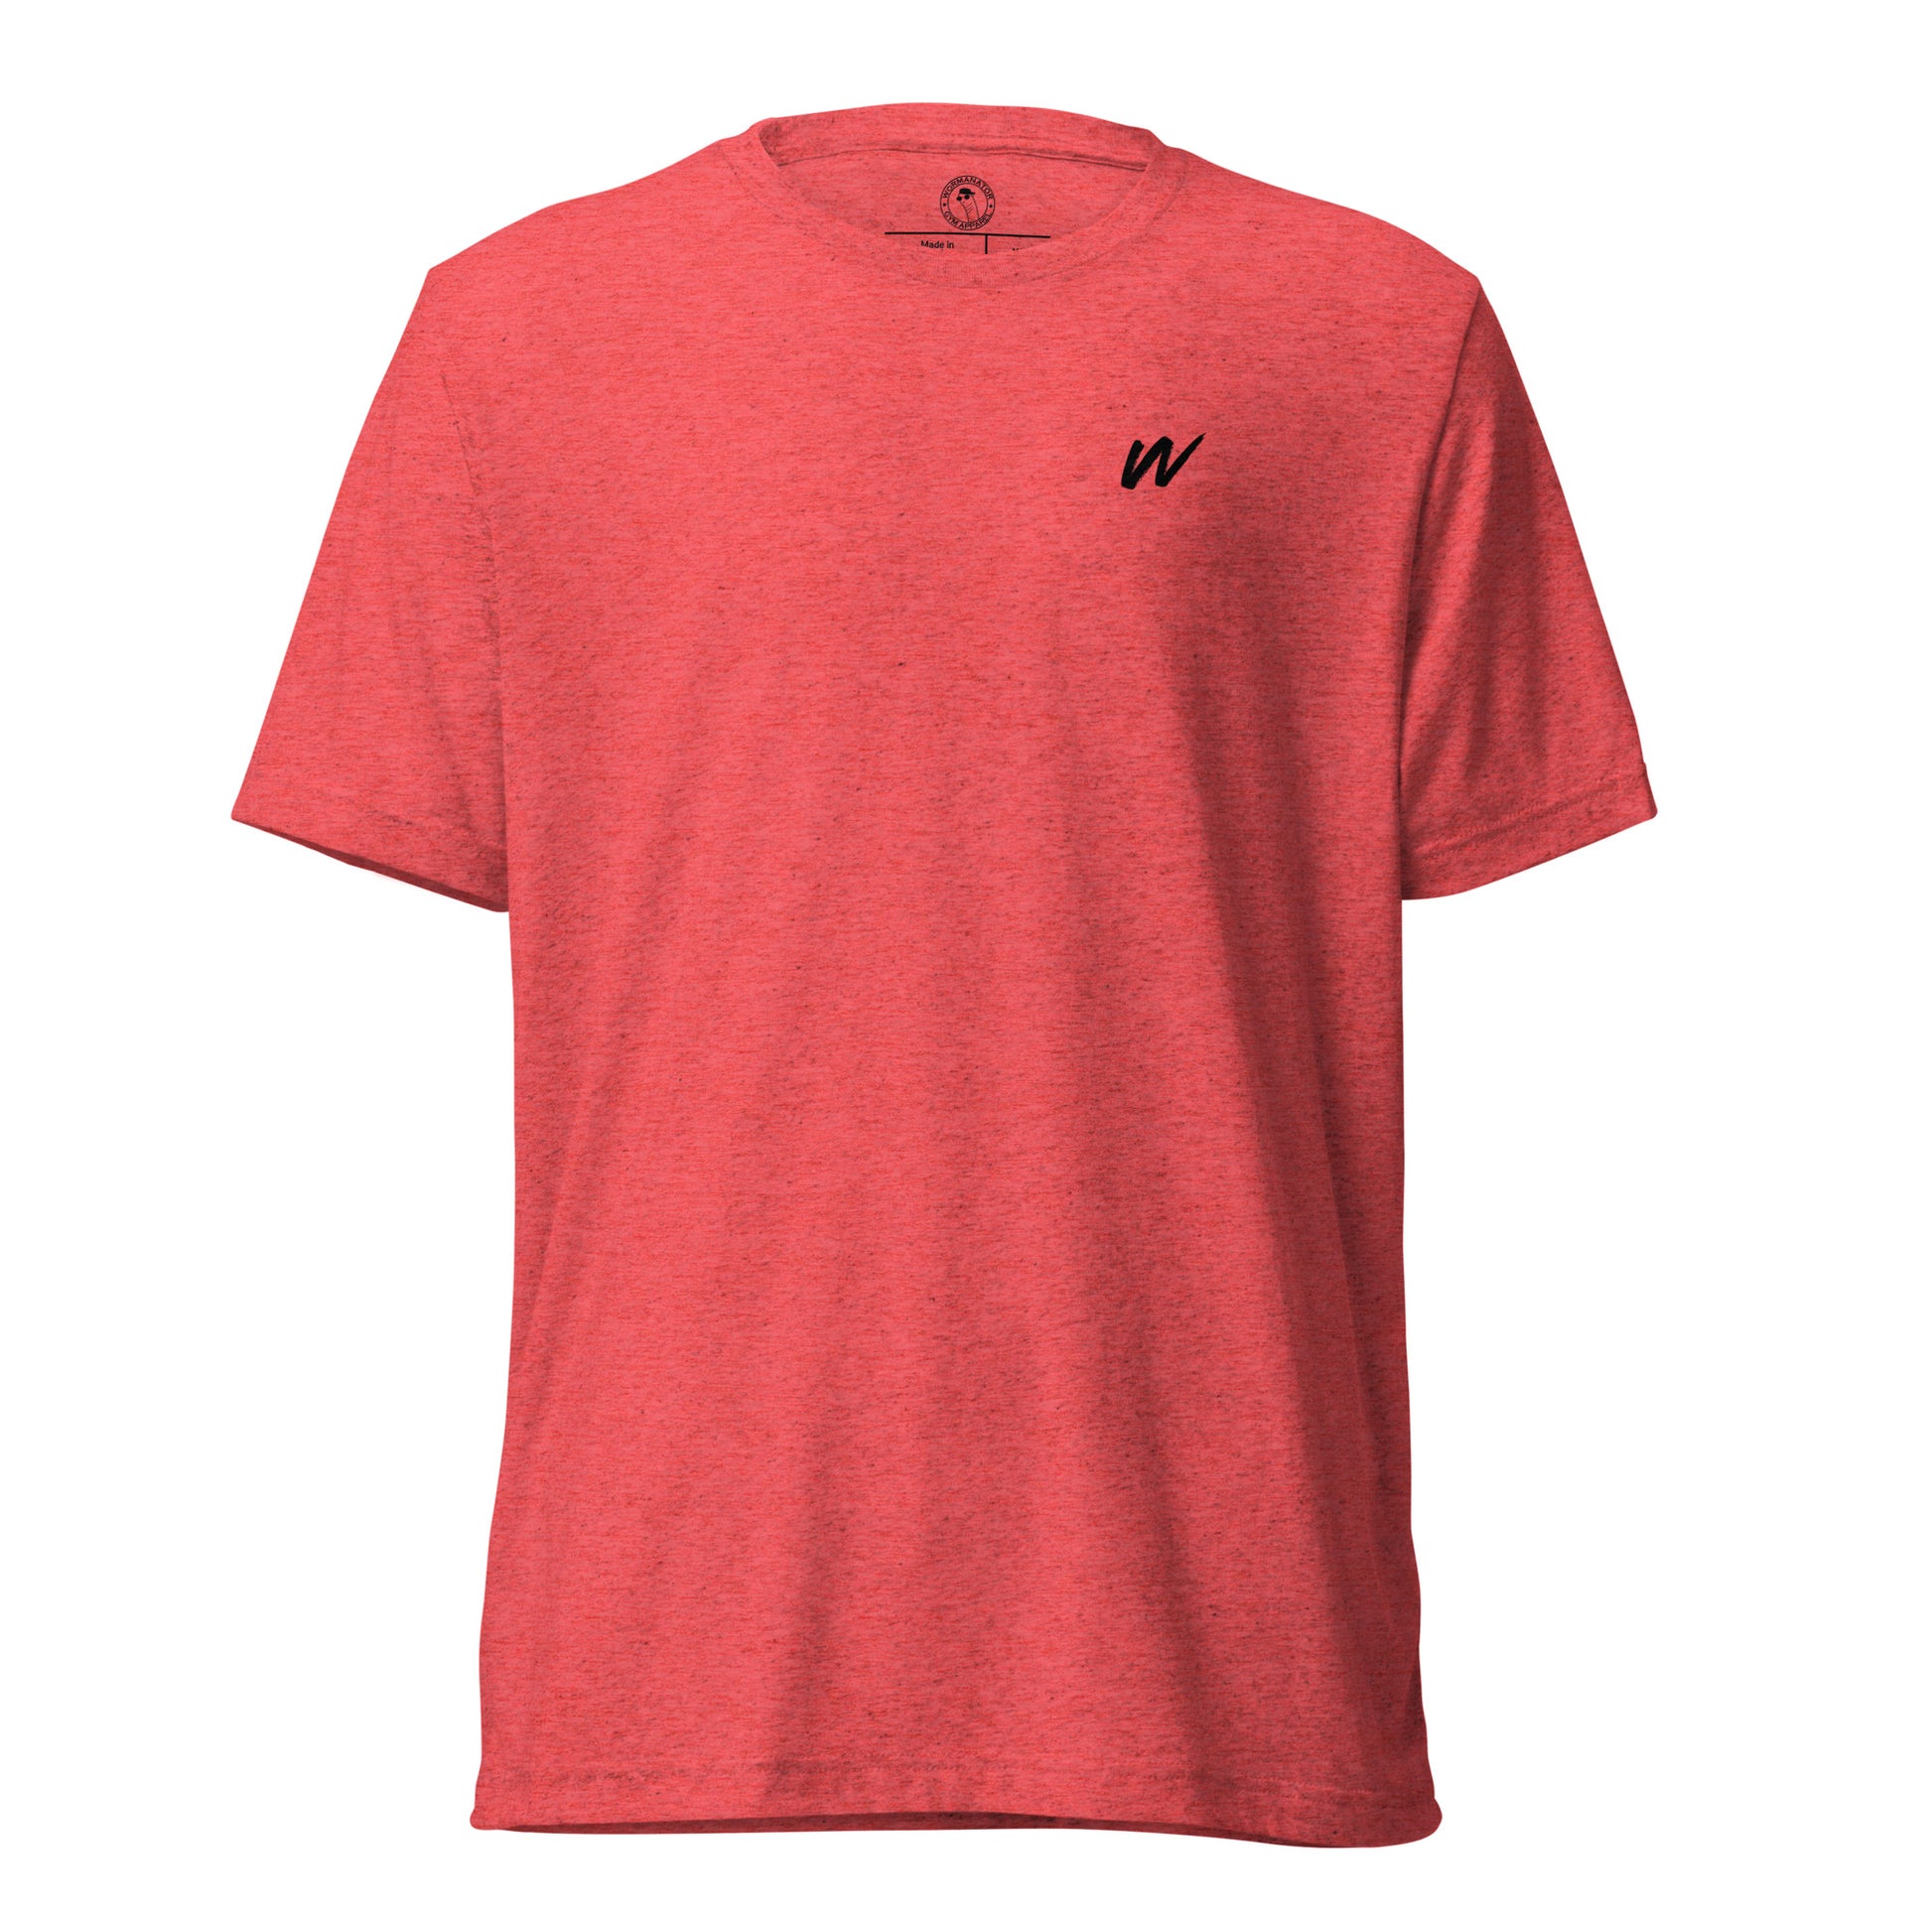 Win the Day T-Shirt in Red Triblend